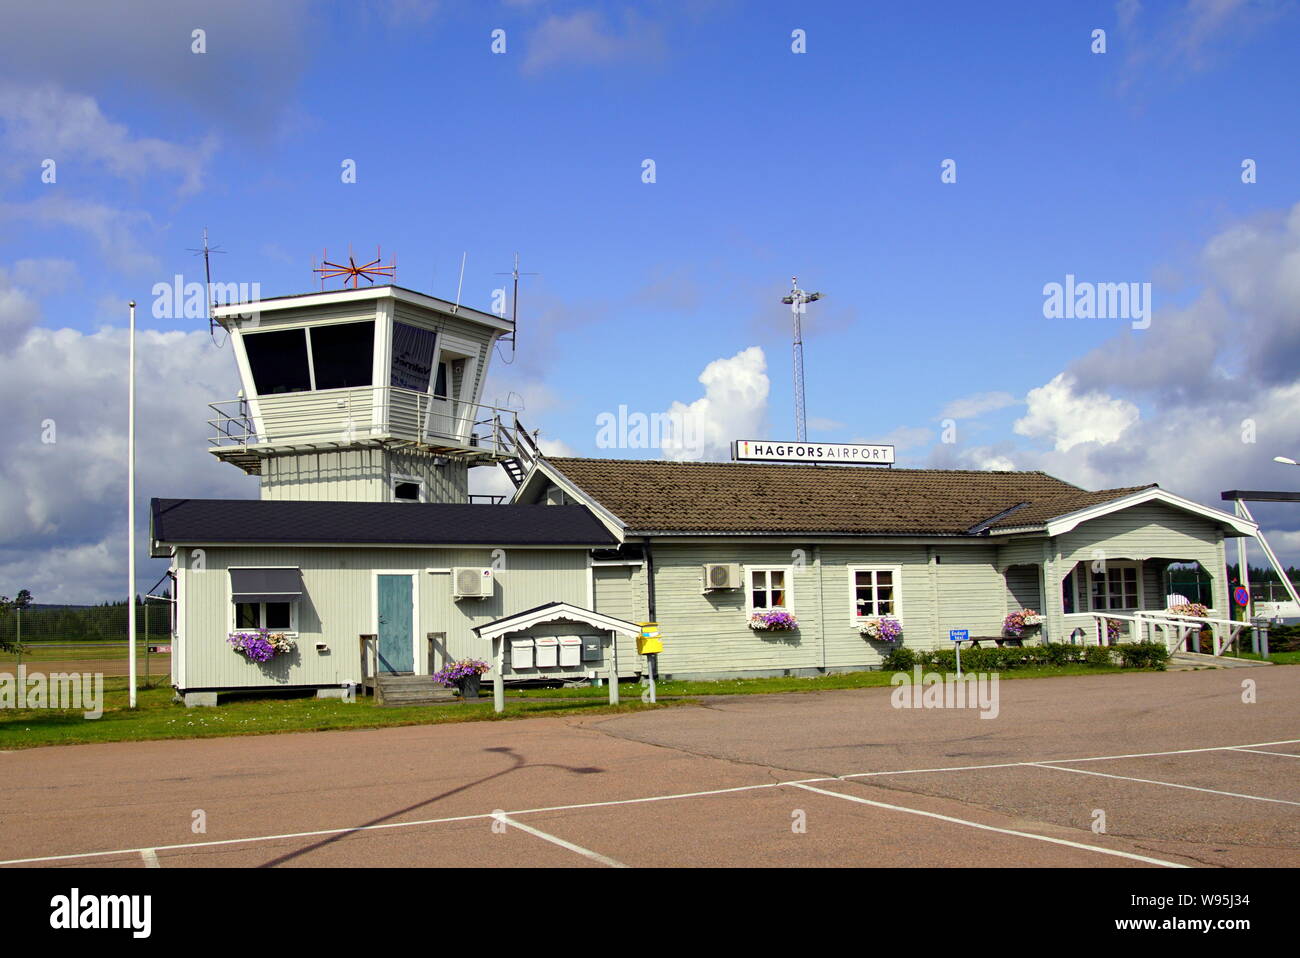 Hagfors, Värmland County, Sweden -August 7, 2019: Terminal building and Air traffic control tower of Hagfors Airpot against a clouded blue sky. Stock Photo